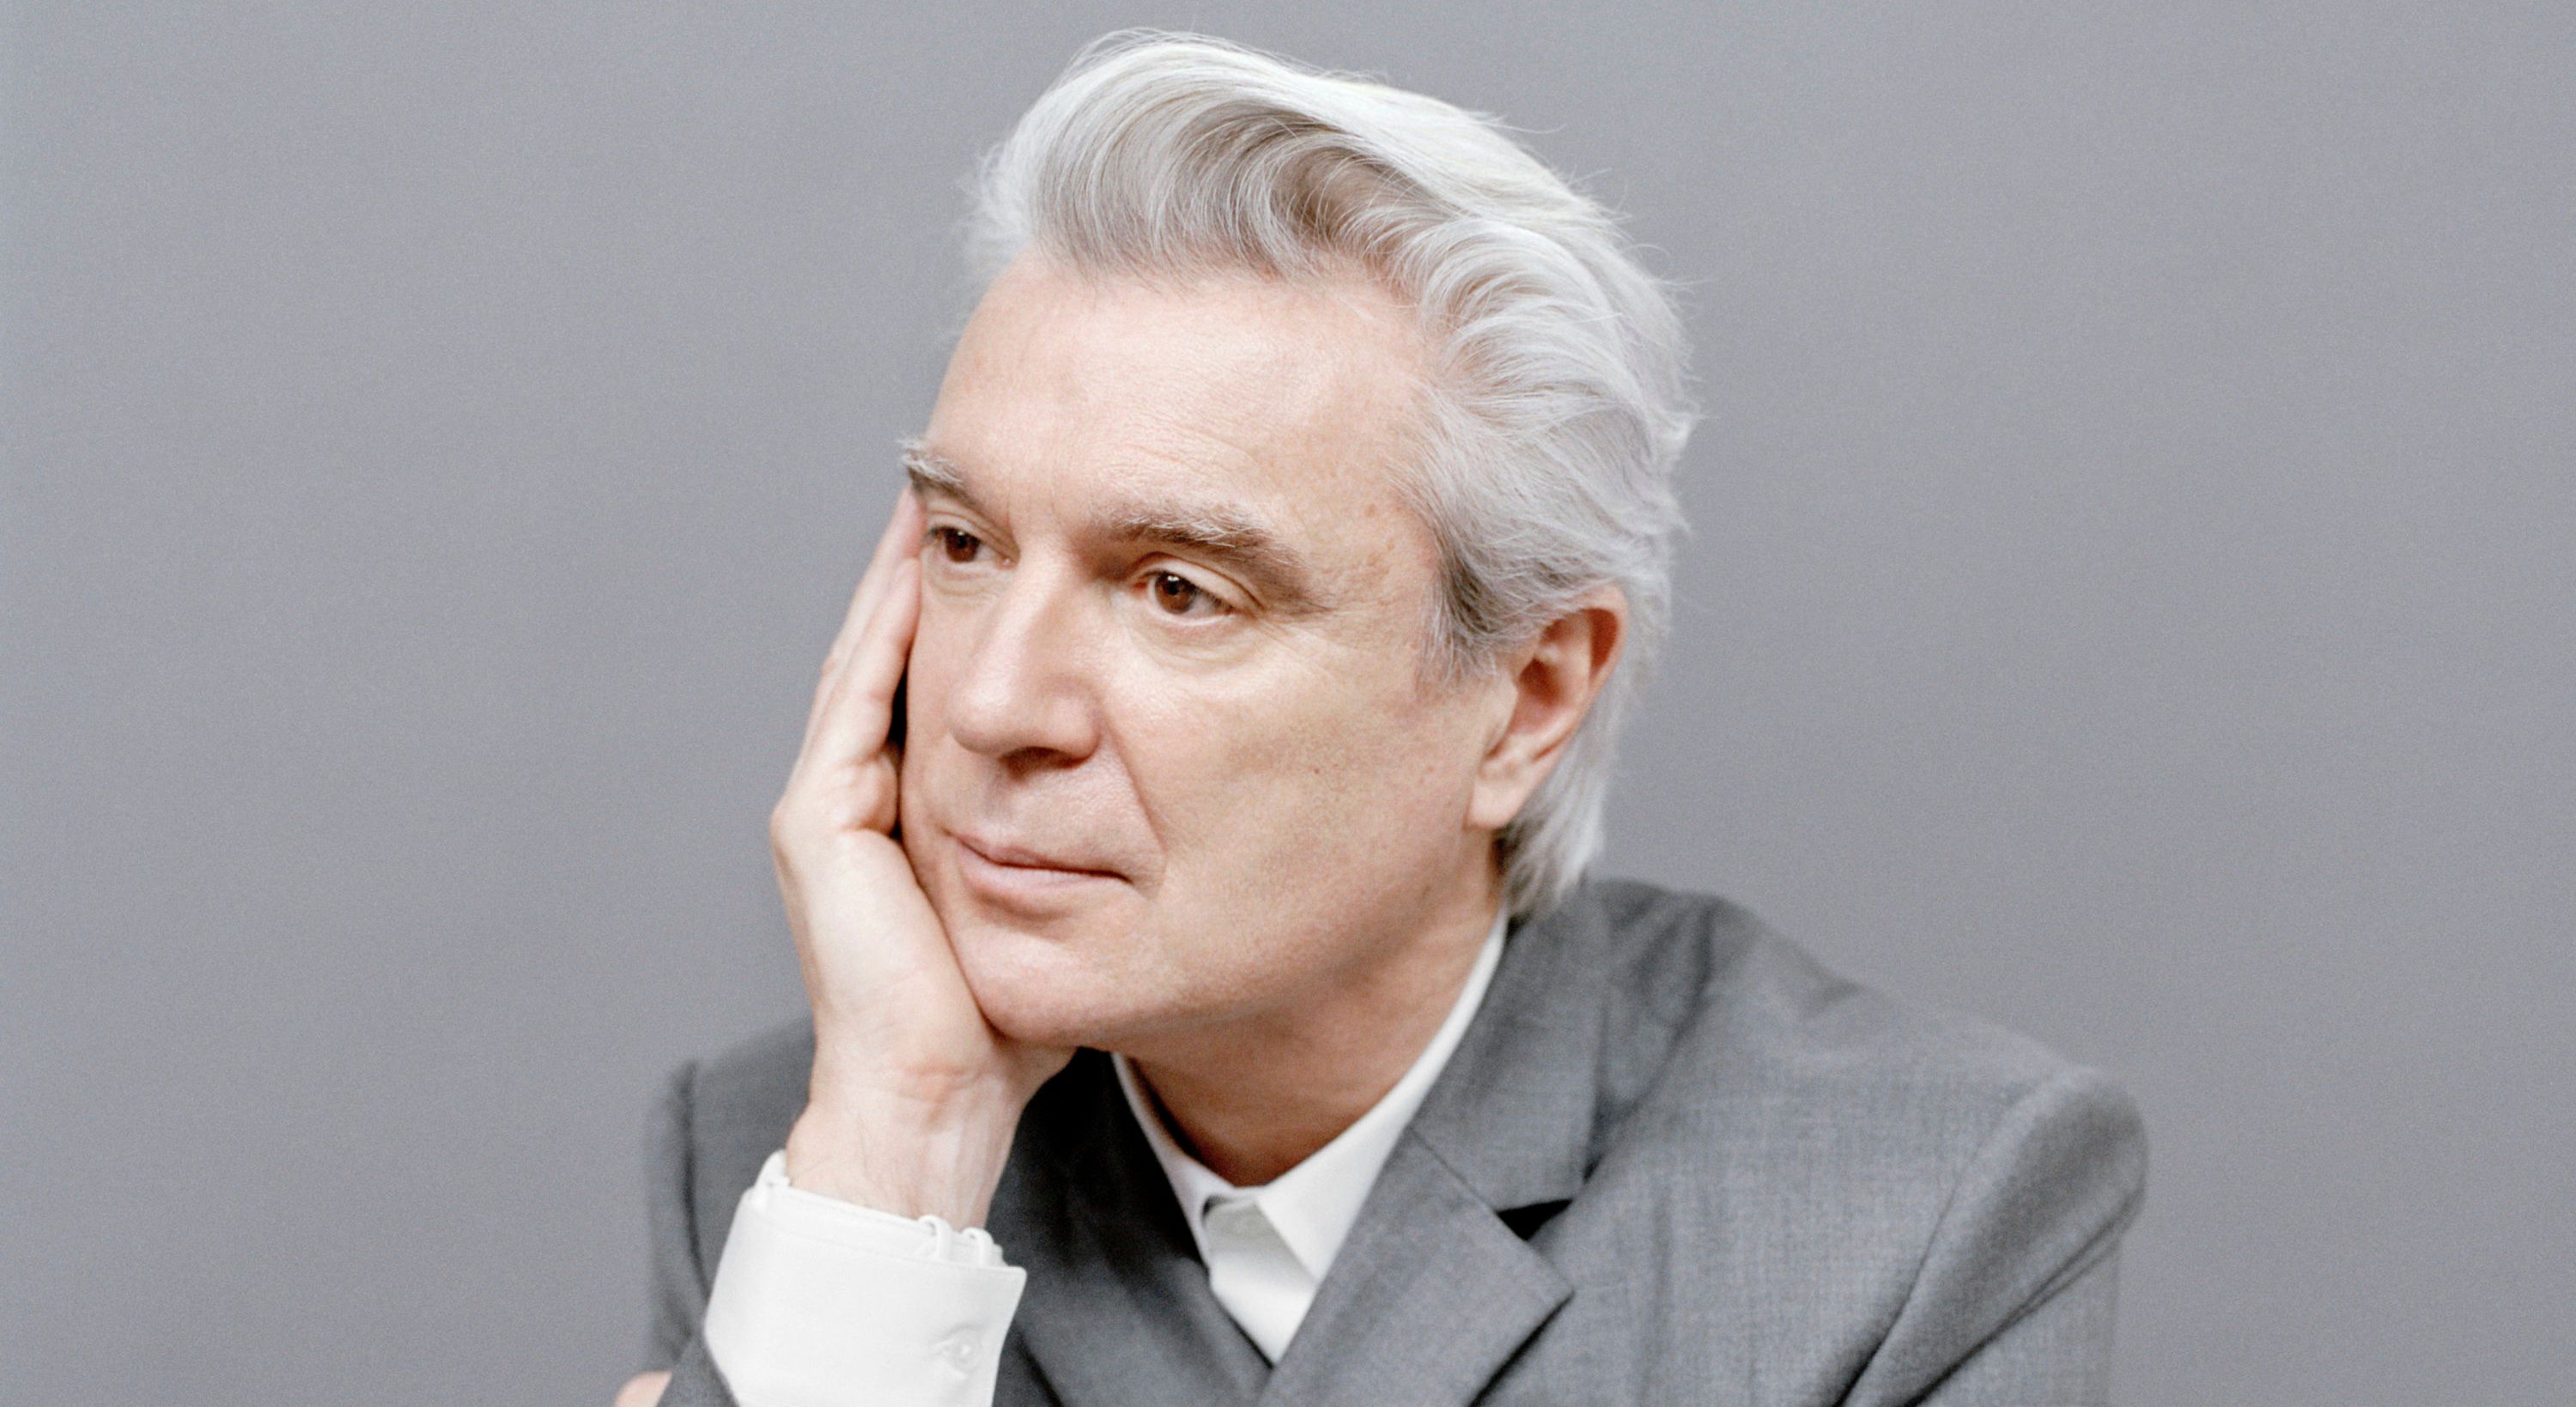 David Byrne’s Performance Art, Activism, and Nonstop Groove